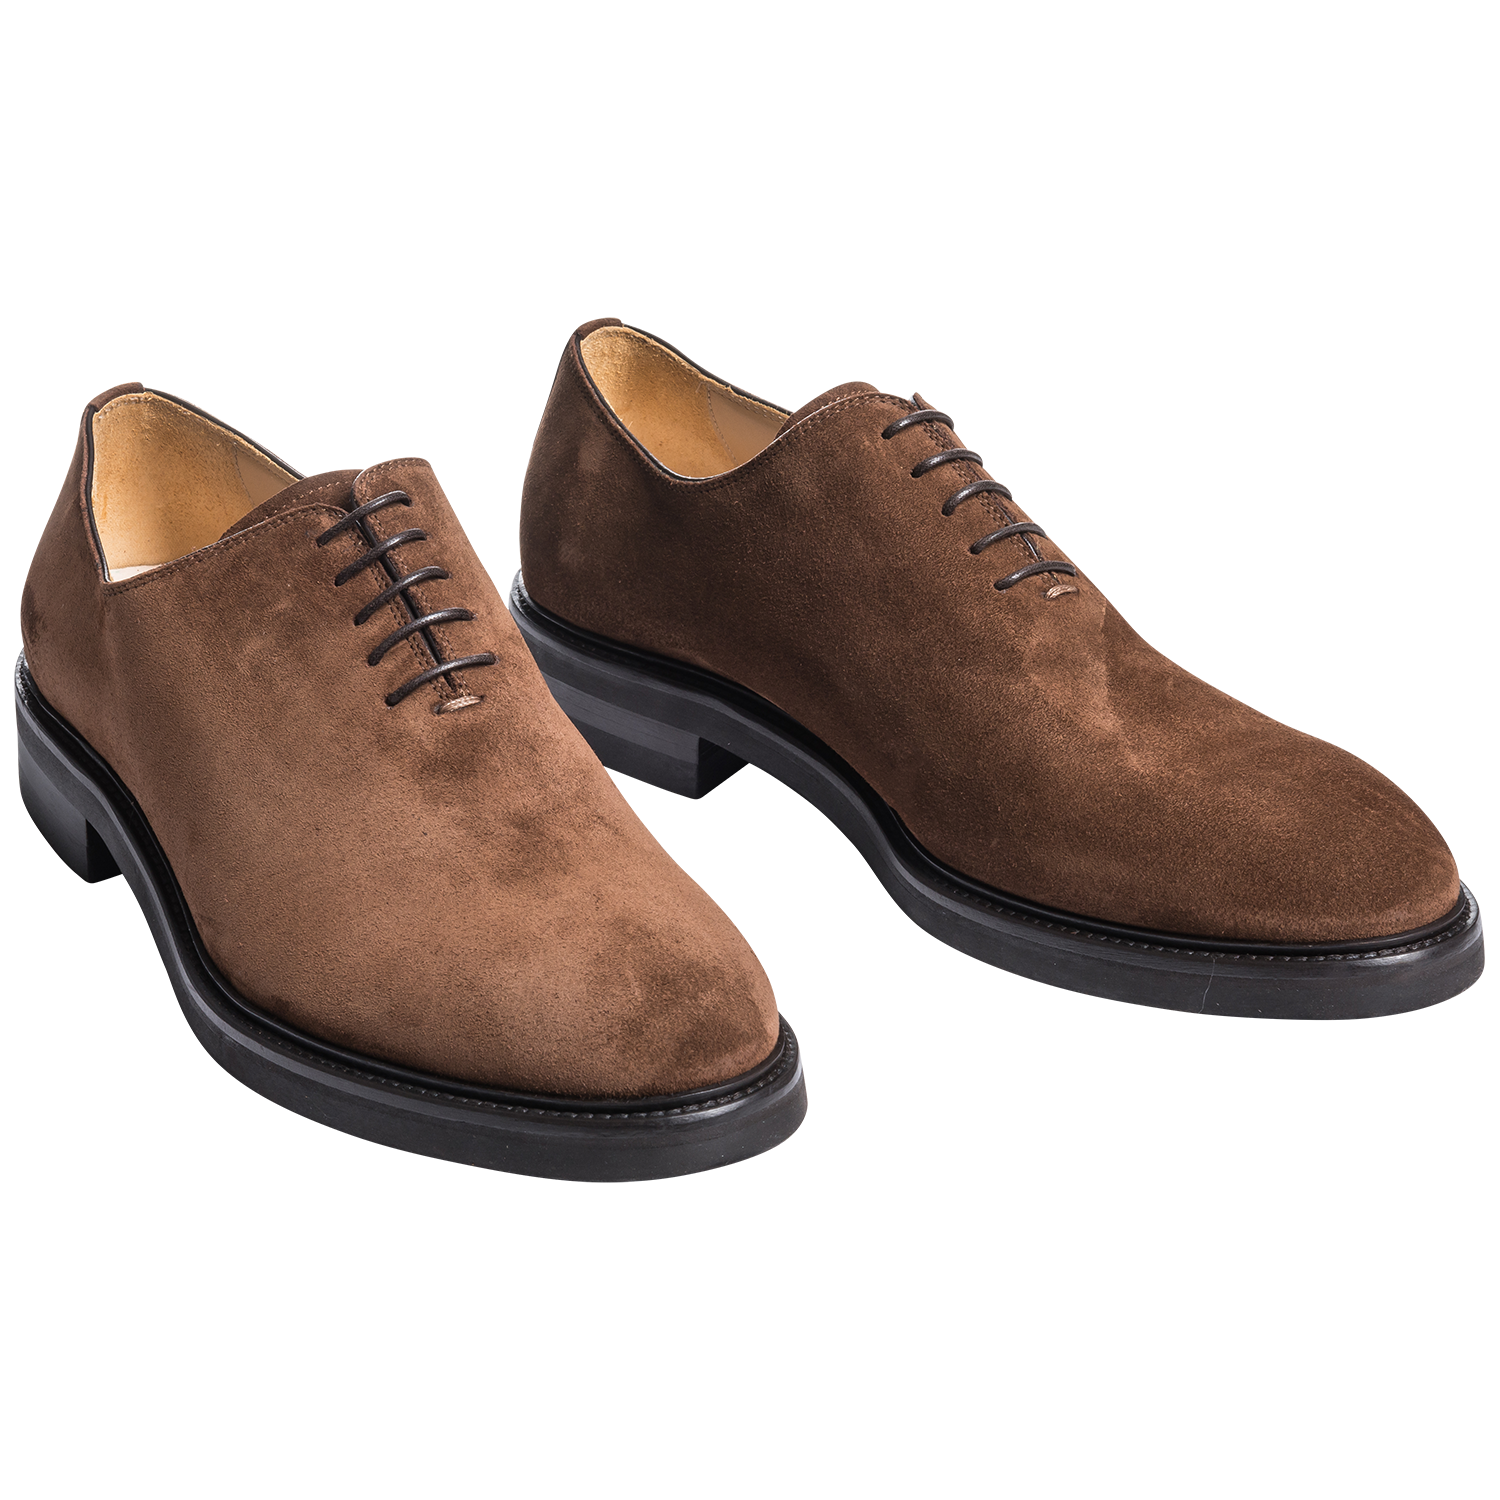 Brown Shoes PNG Free Download